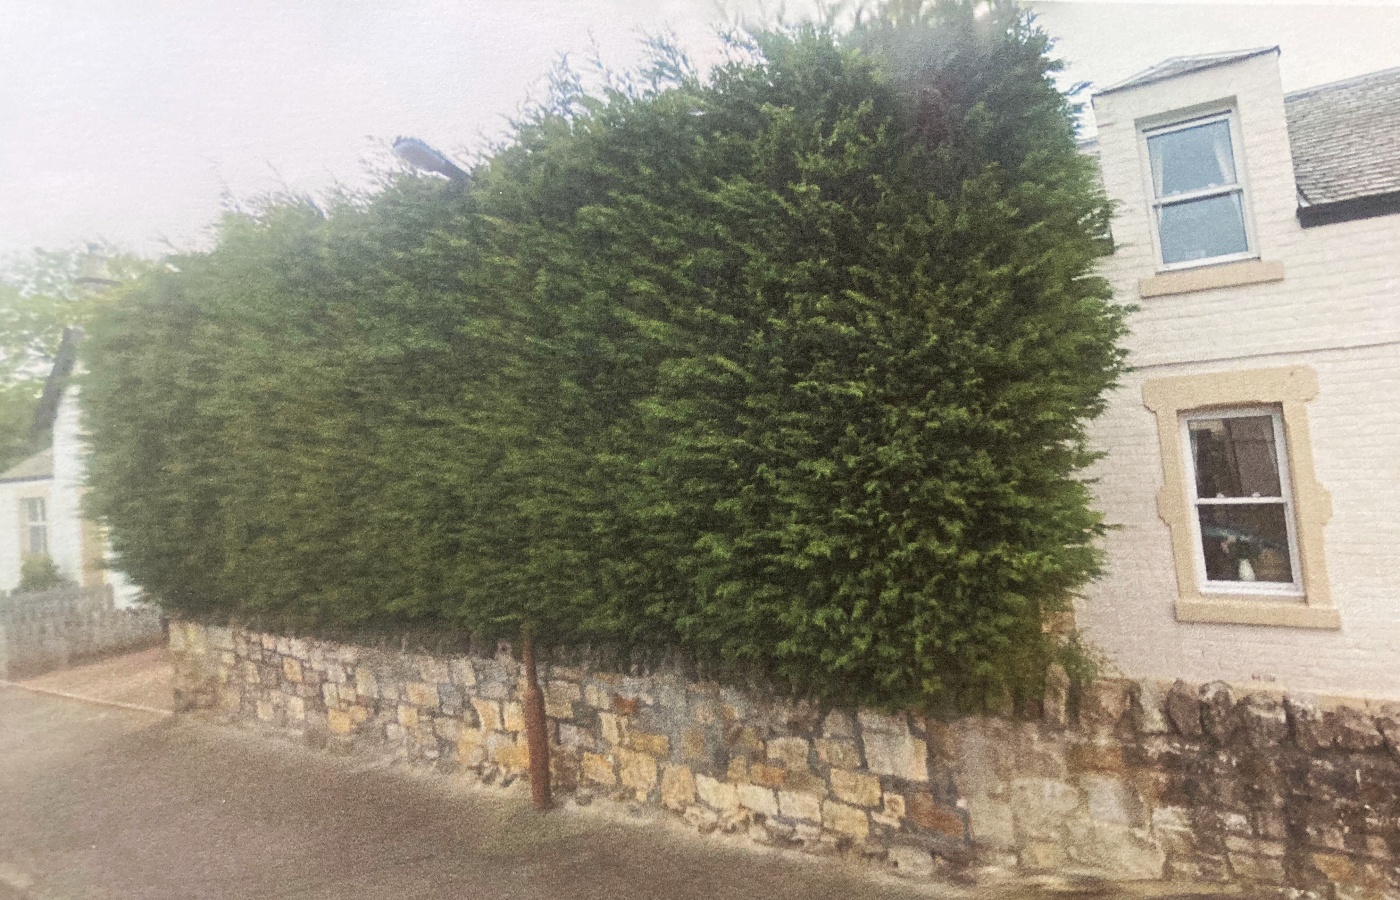 Hedge outside house in Pencaitland grew so high it overshadowed the lamppost.